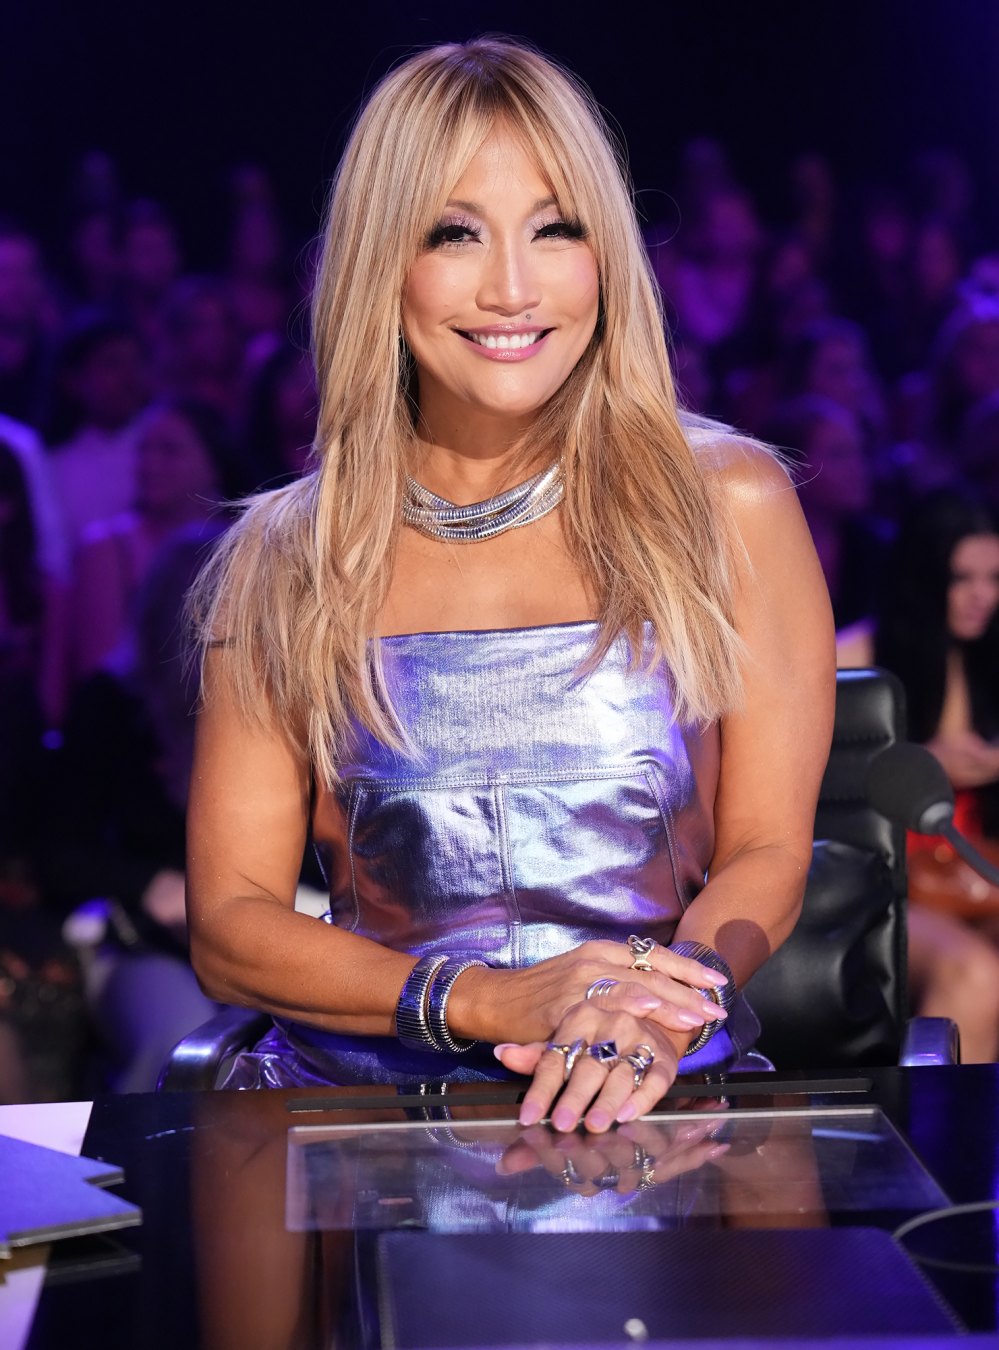 DWTS's Carrie Ann Inaba says she has to 